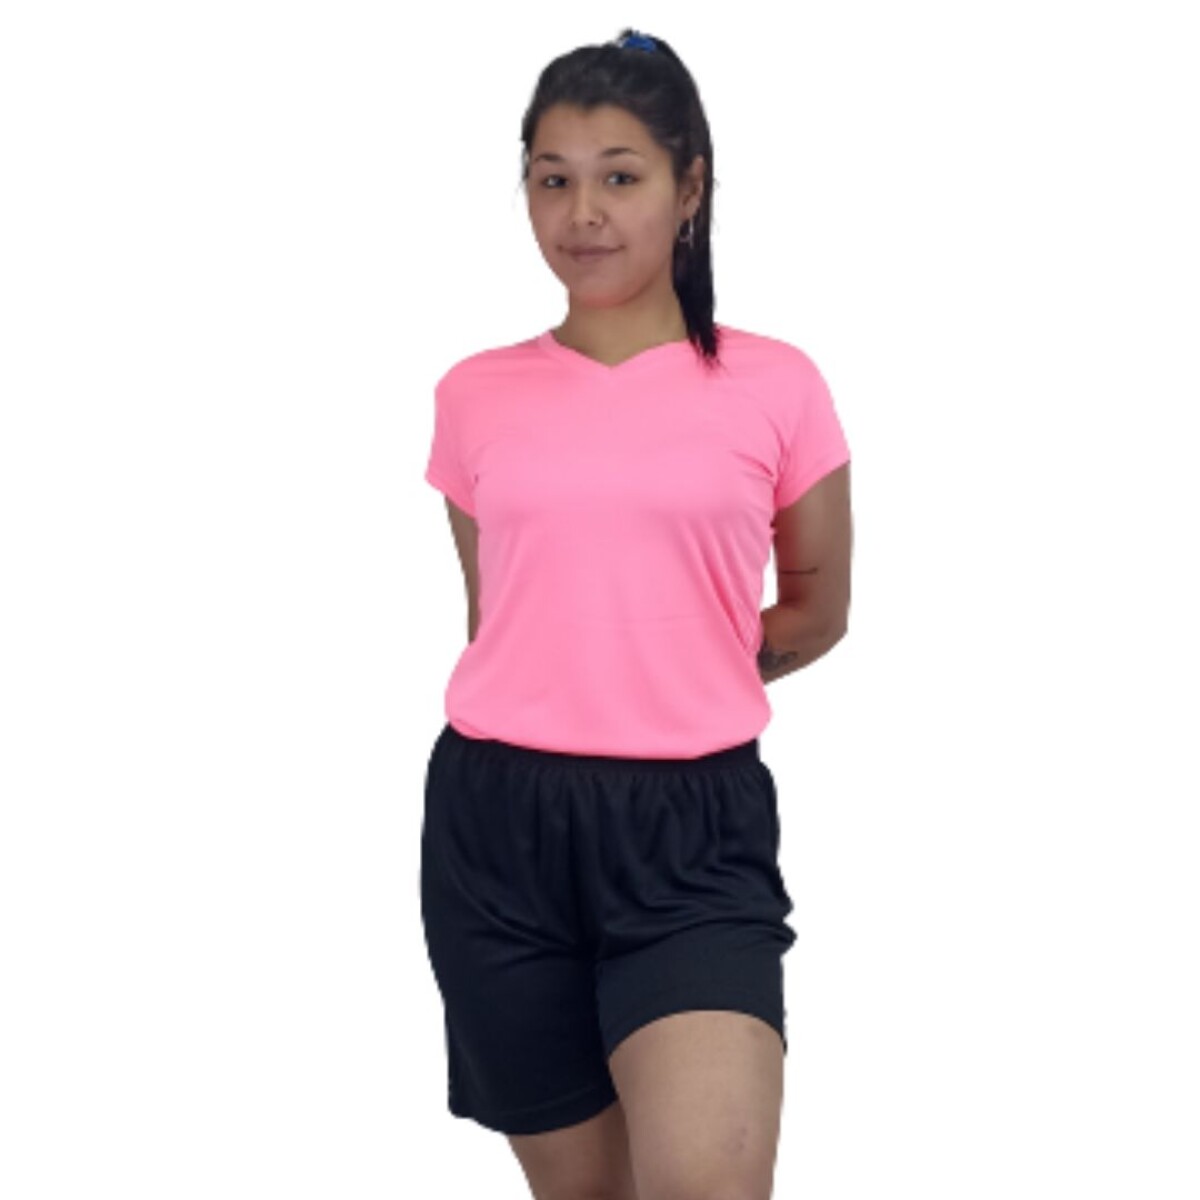 Remera Dry Fit Dama - Rosa fluo 